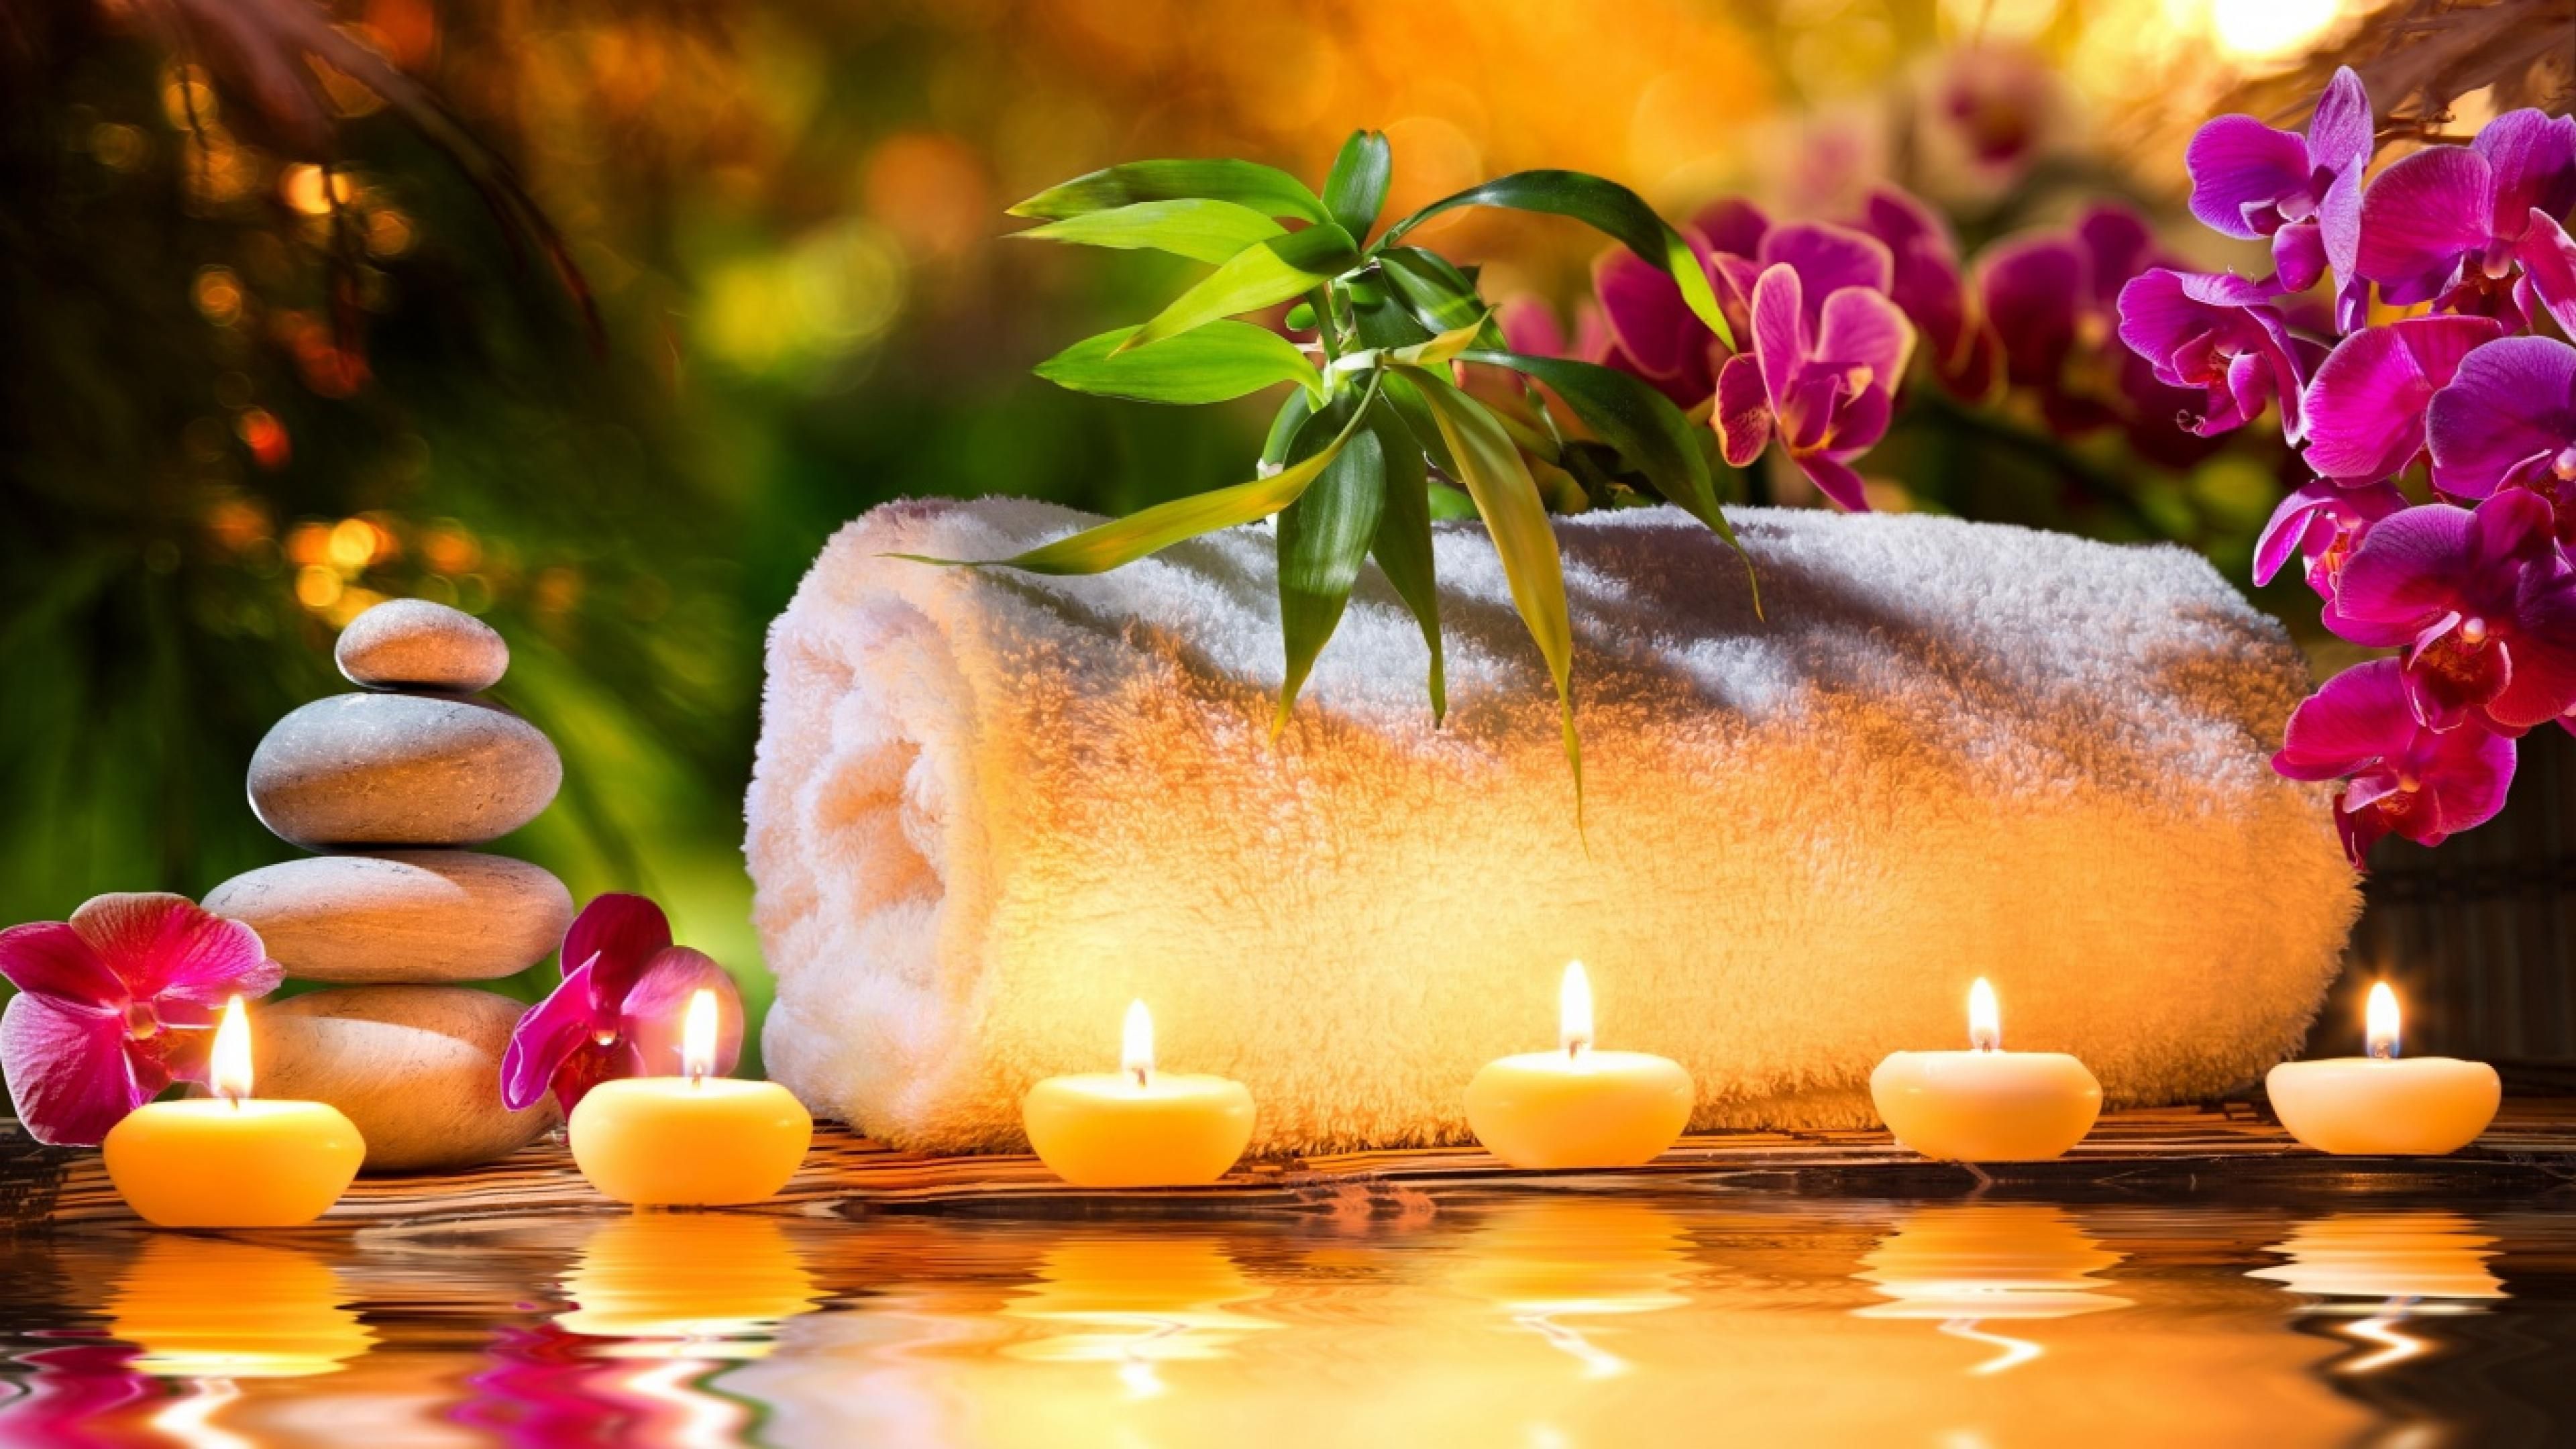 Click Here To Download In HD Format >> Candles Wallpaper 44 Wallpaper Candles Wa. Candles Wallpaper, Spa Candle, Spa Decor